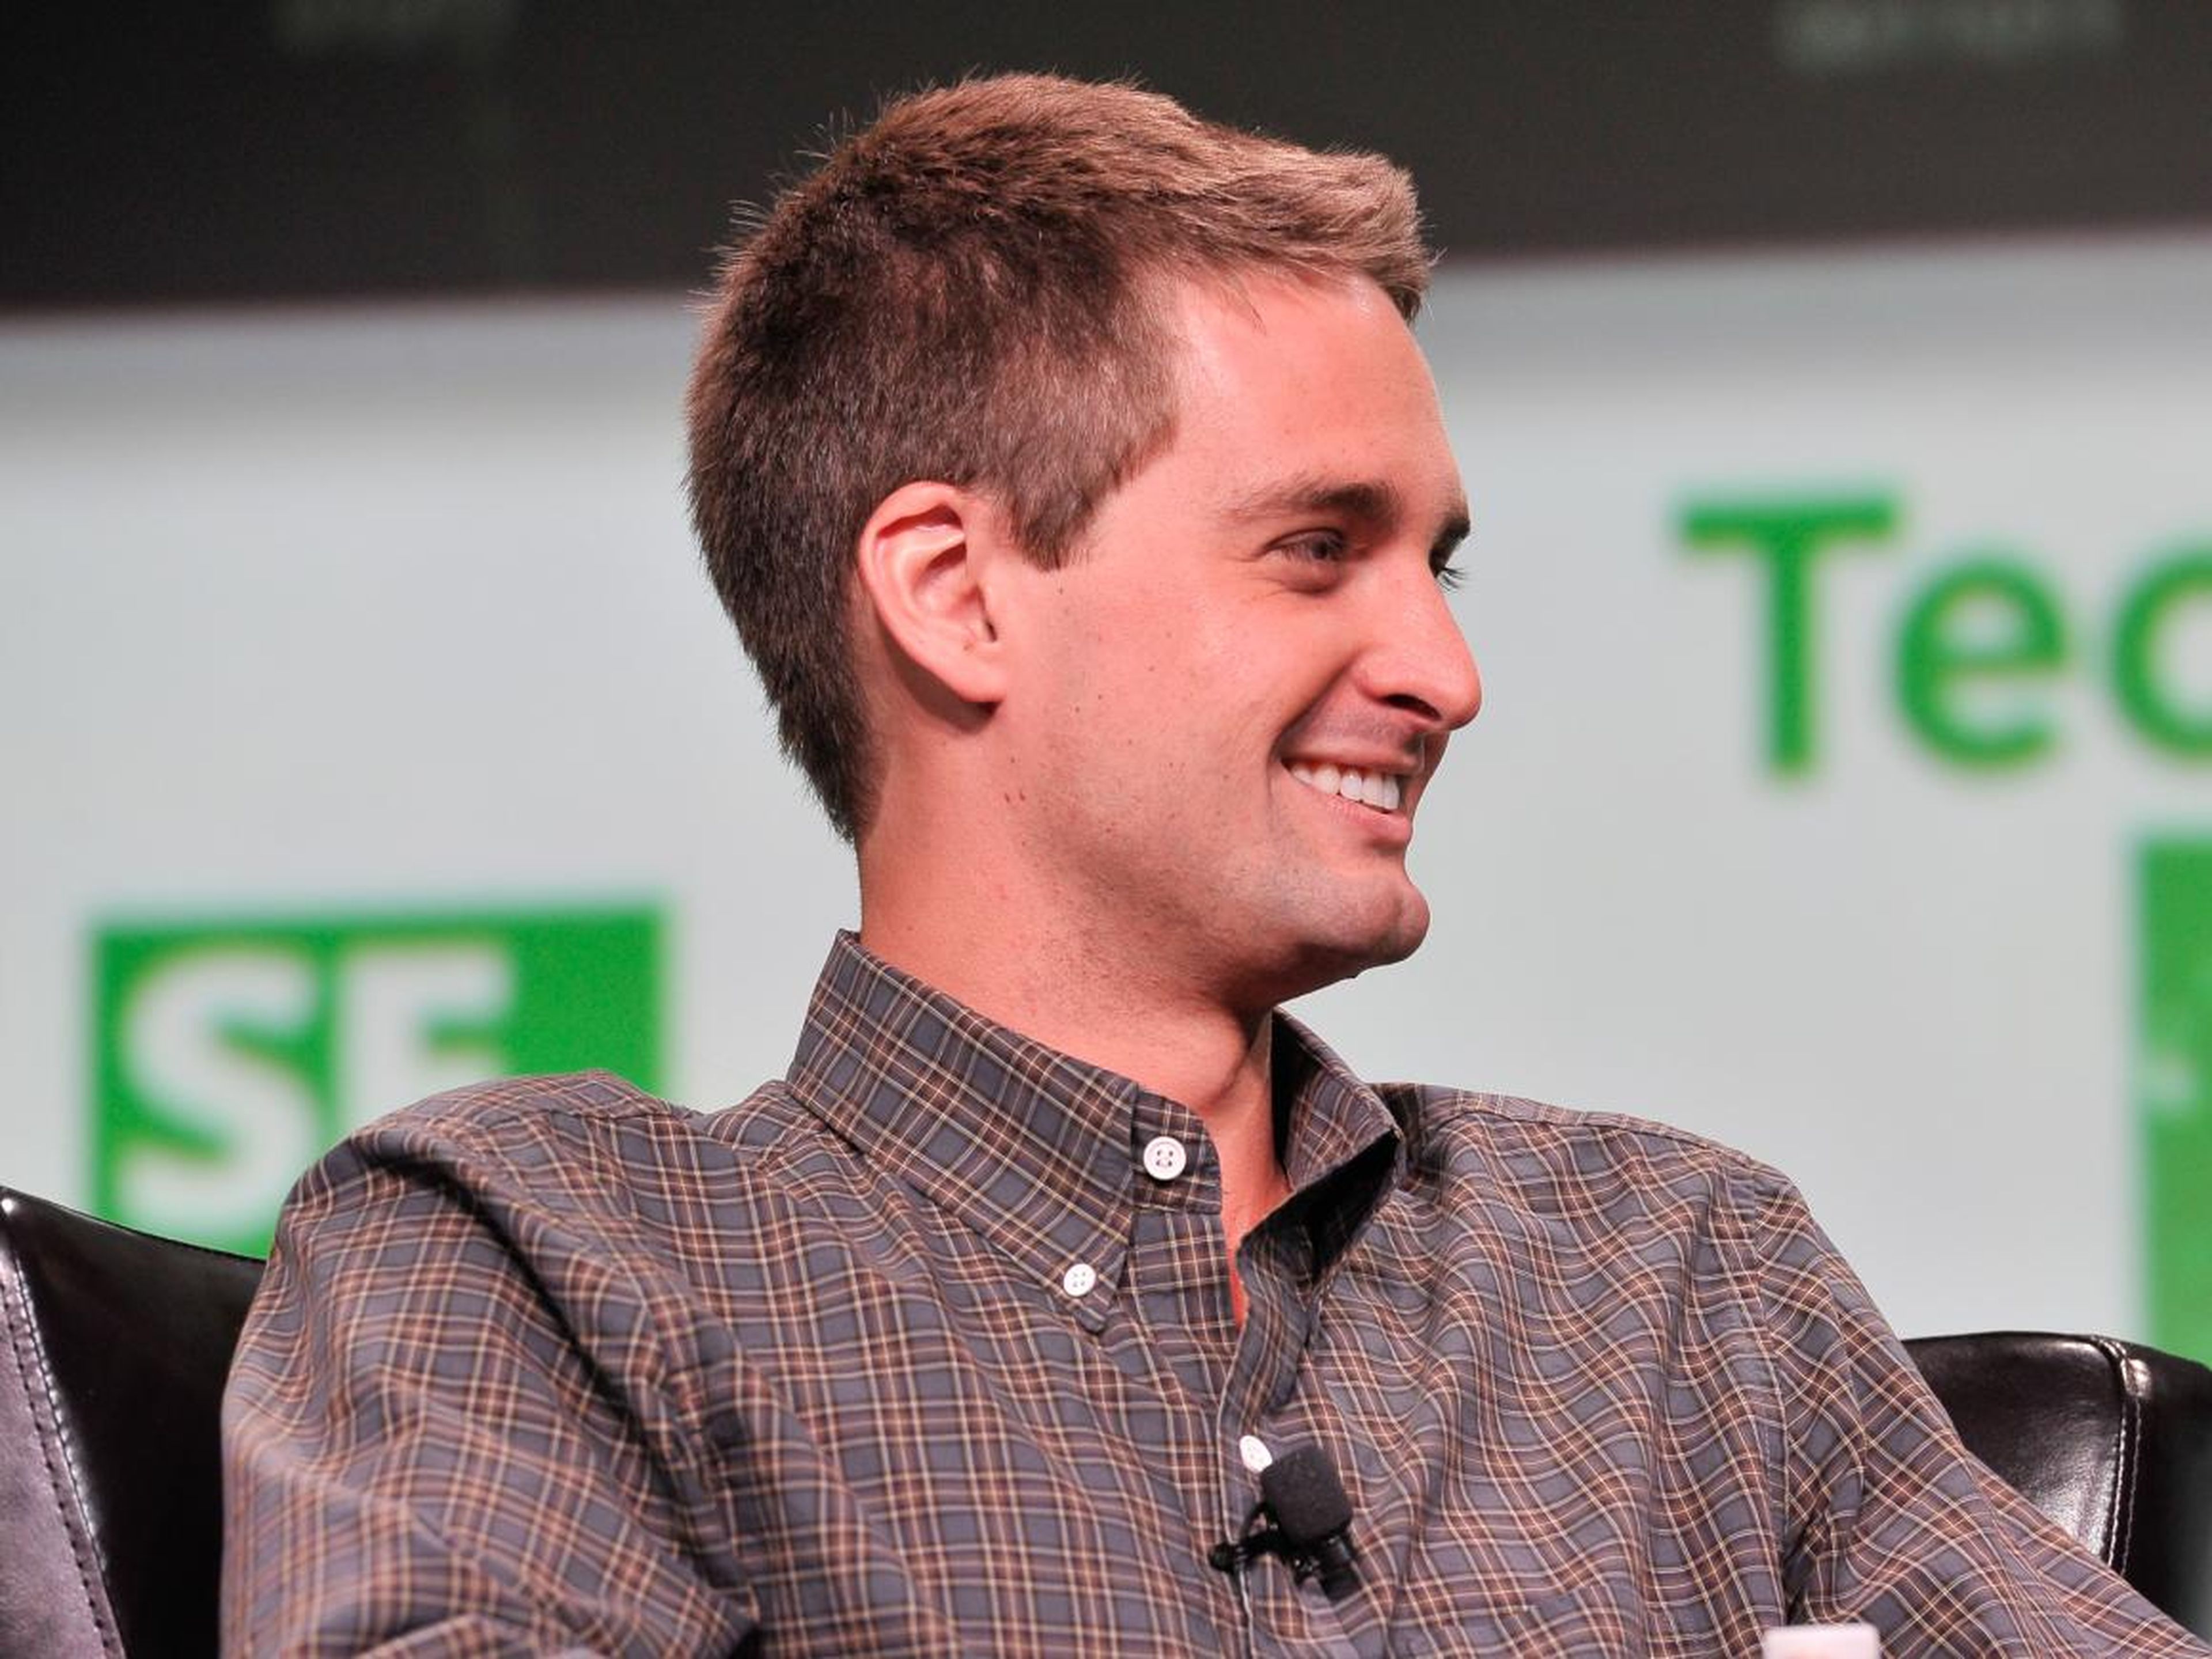 "There are very few people in the world who get to build a business like this. I think trading that for some short-term gain isn't very interesting." — Evan Spiegel, CEO of Snap Inc., on not selling to Facebook